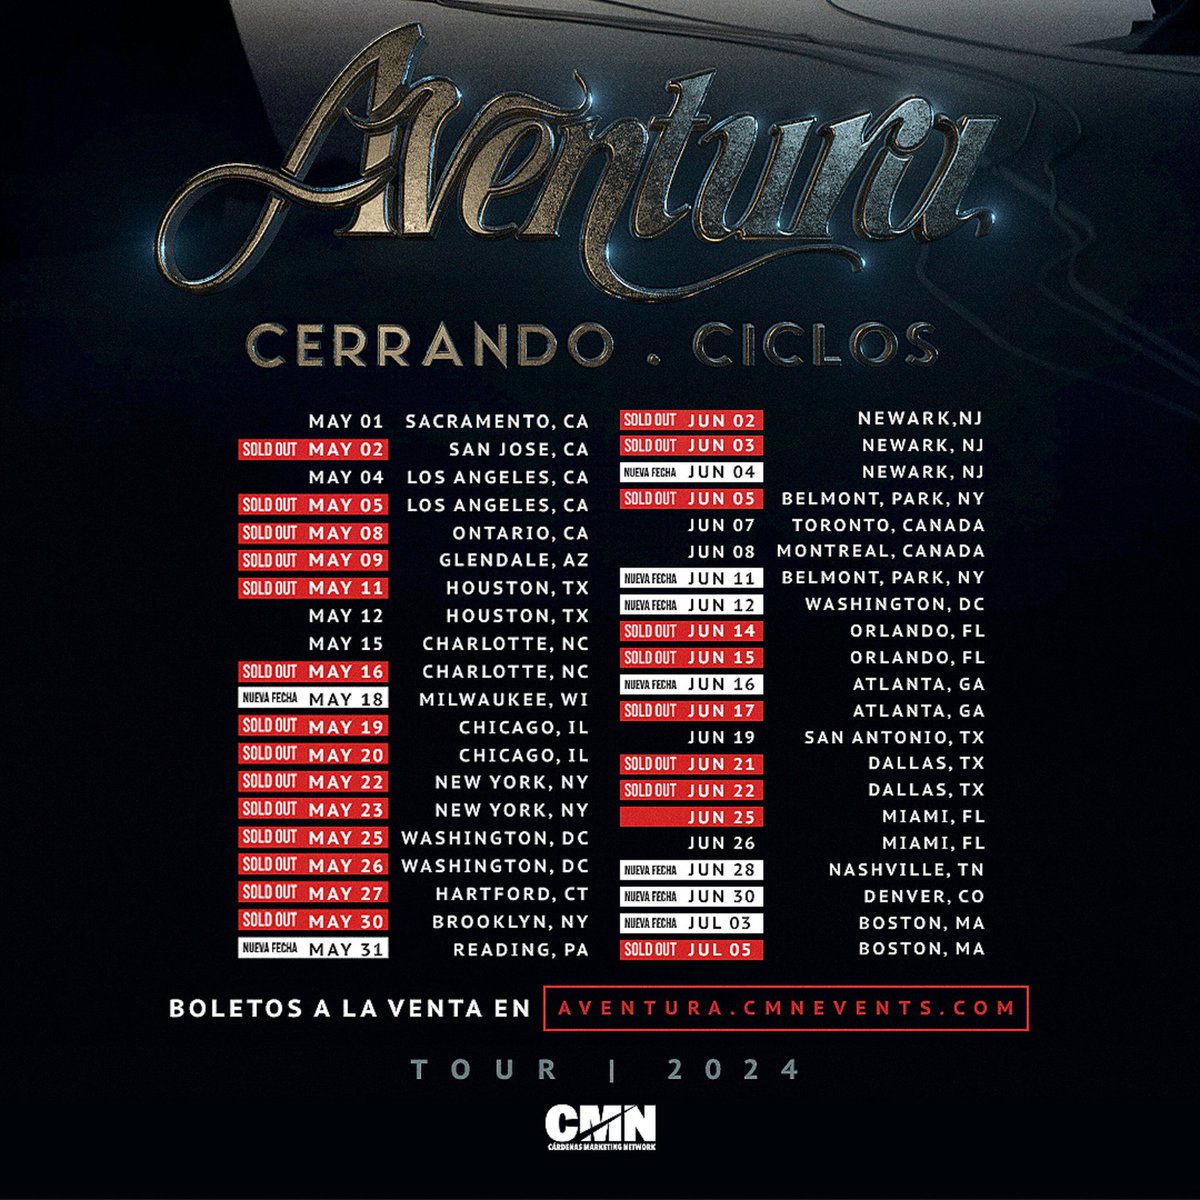 DUE TO HIGH DEMAND, THE KINGS OF BACHATA “AVENTURA” HAVE ADDED NINE SHOW DATES AND FOUR NEW CITIES TO THEIR “CERRANDO CICLOS” TOUR Pre Sale : Thursday March 14th 12PM LOCAL Pre-sale code: Aventura #CerrandoCiclos